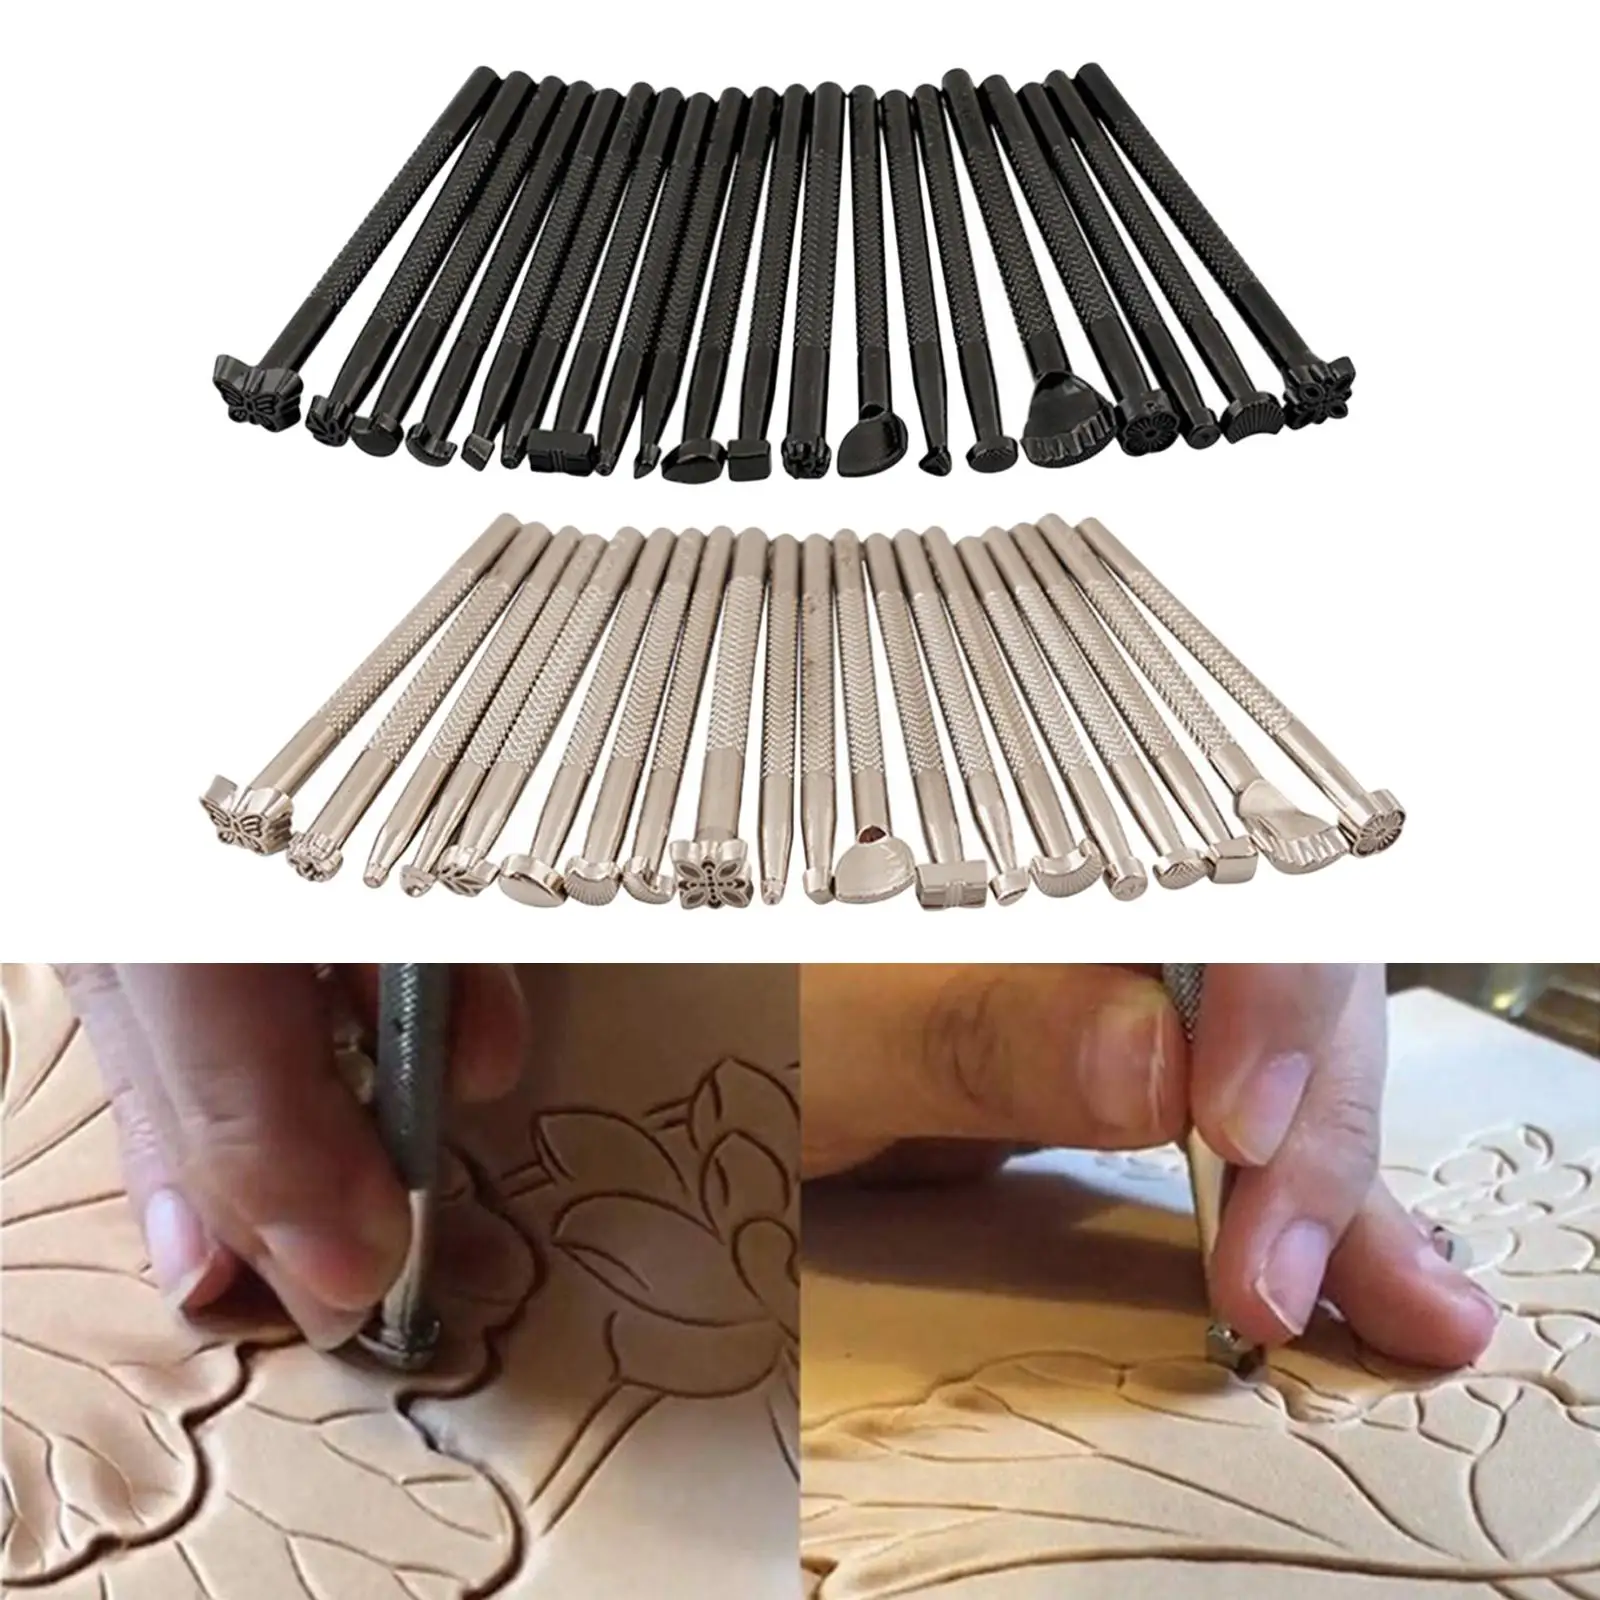 20pcs Leather Stamp Printing Tool Handmade Alloy Stamp Punch Set Carving Saddle Making Tools for Leather Crafts DIY Artwork